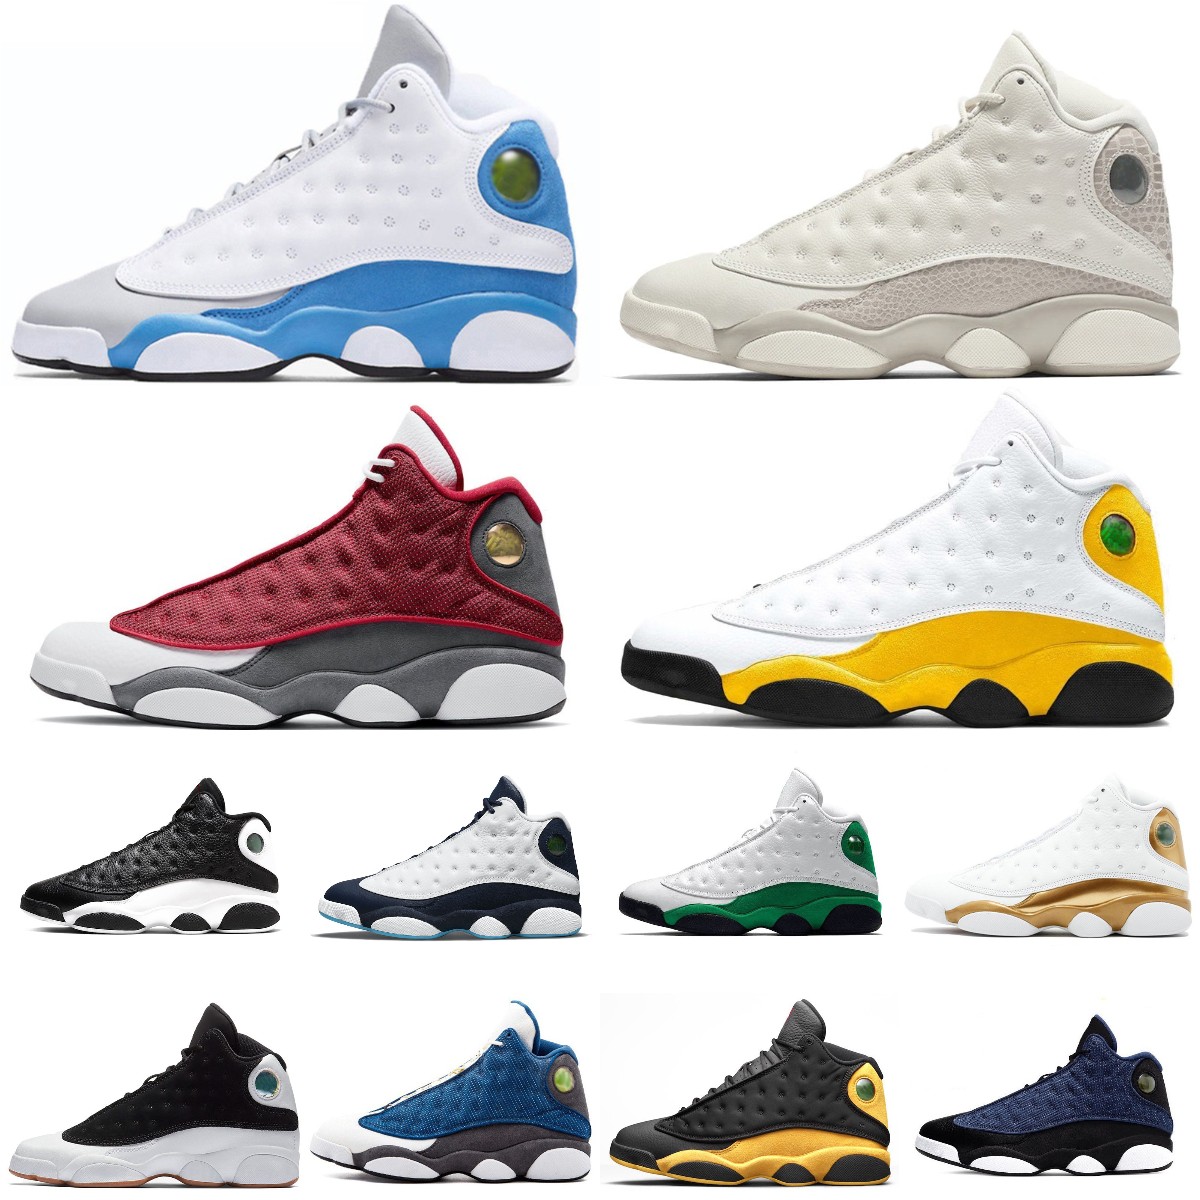 

Basketball Shoes 13 13S Mens High Flint grey Bred Island Green Red Dirty Hyper Royal Starfish He Got Game Black Cat Court Purple Grey Del Sol Brave Blue Trainer Sneakers, Bubble column